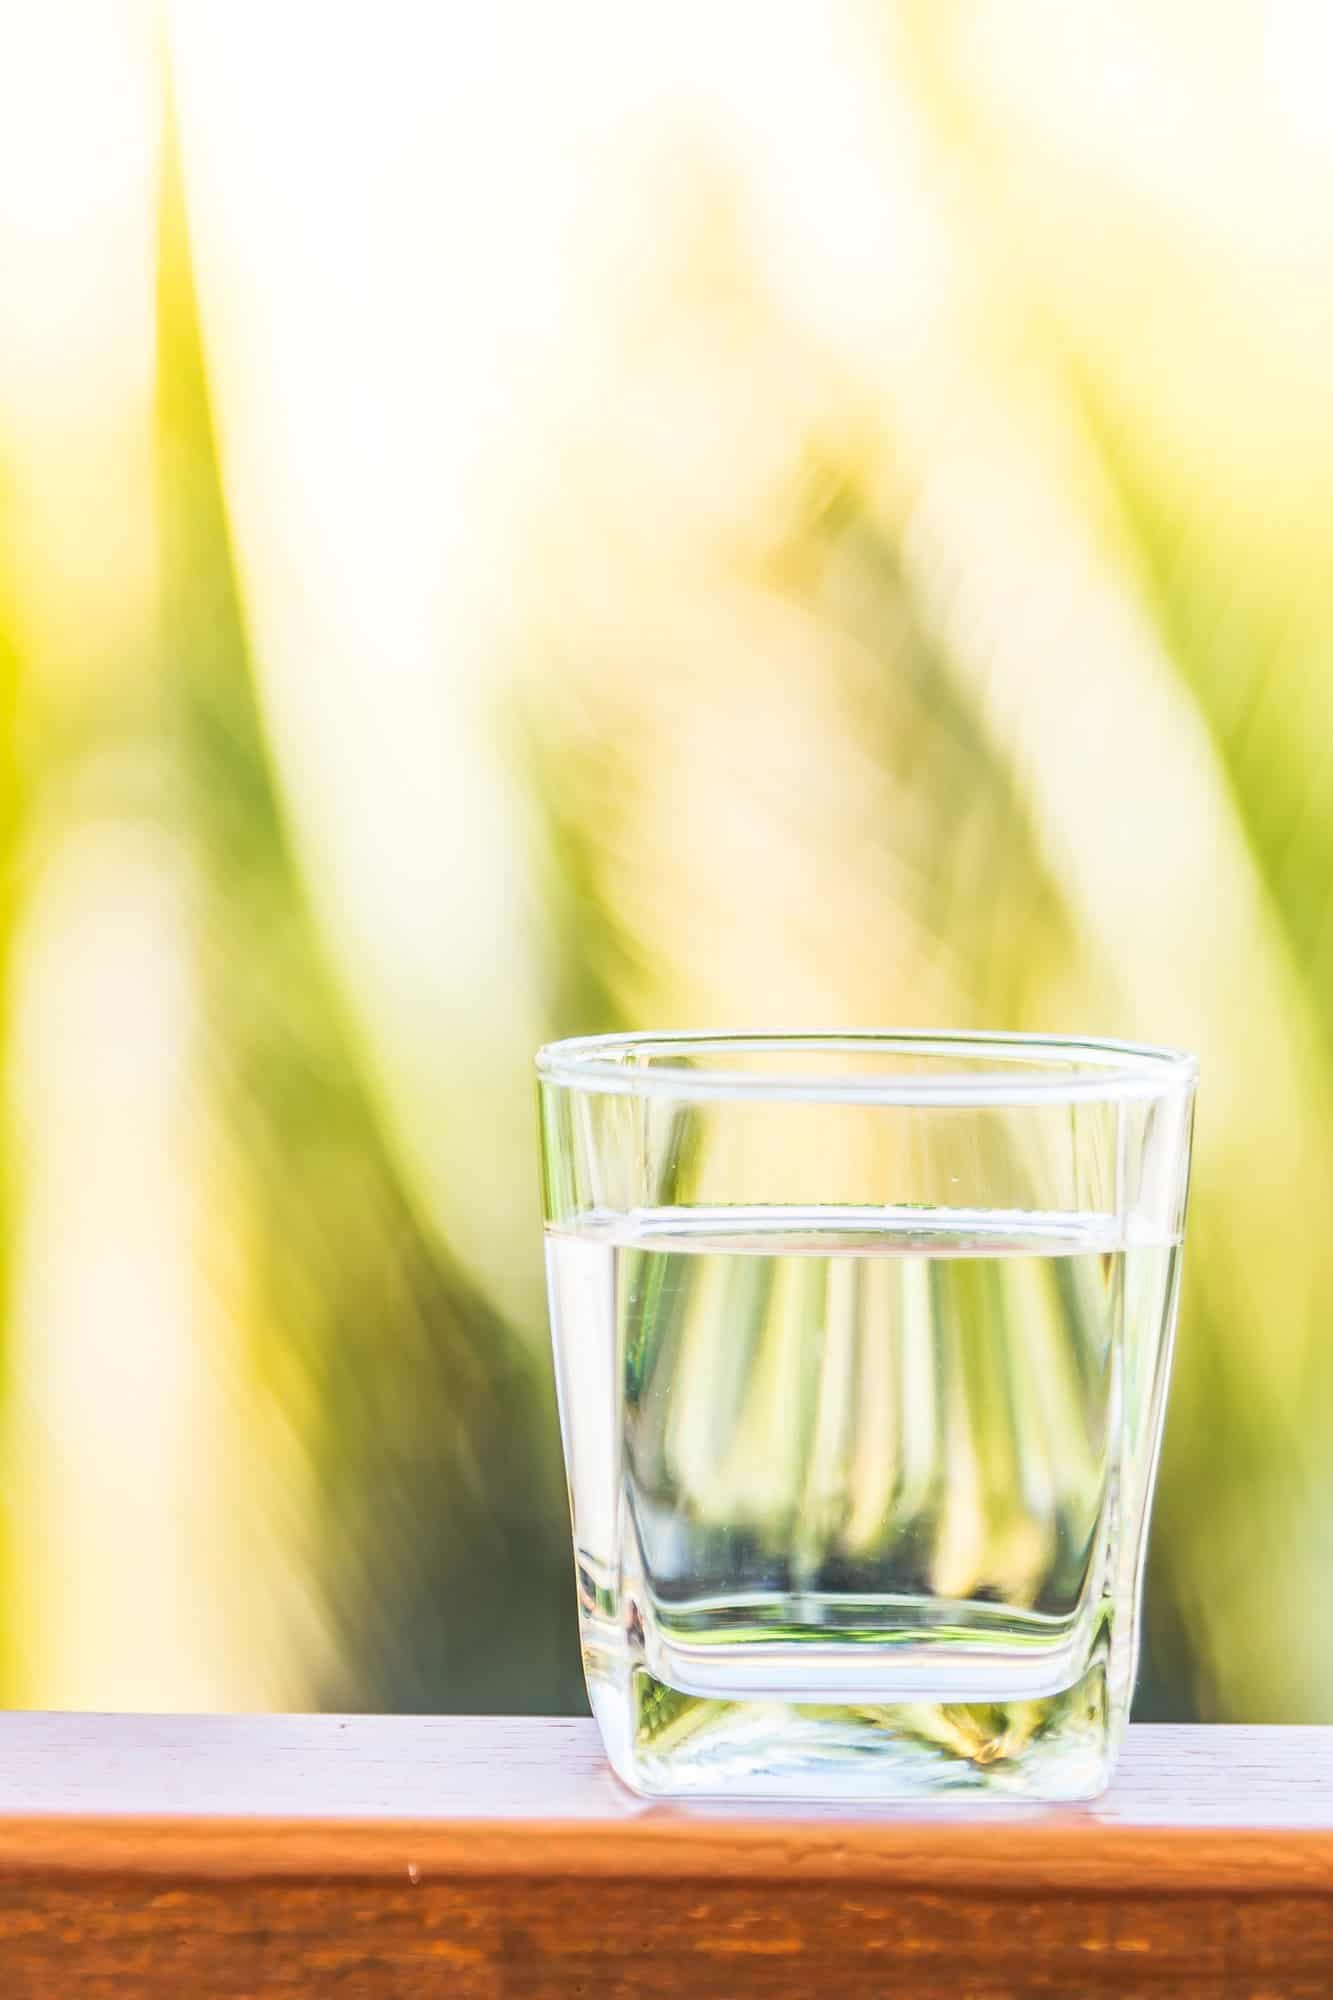 Drink more water daily by keeping a water glass handy